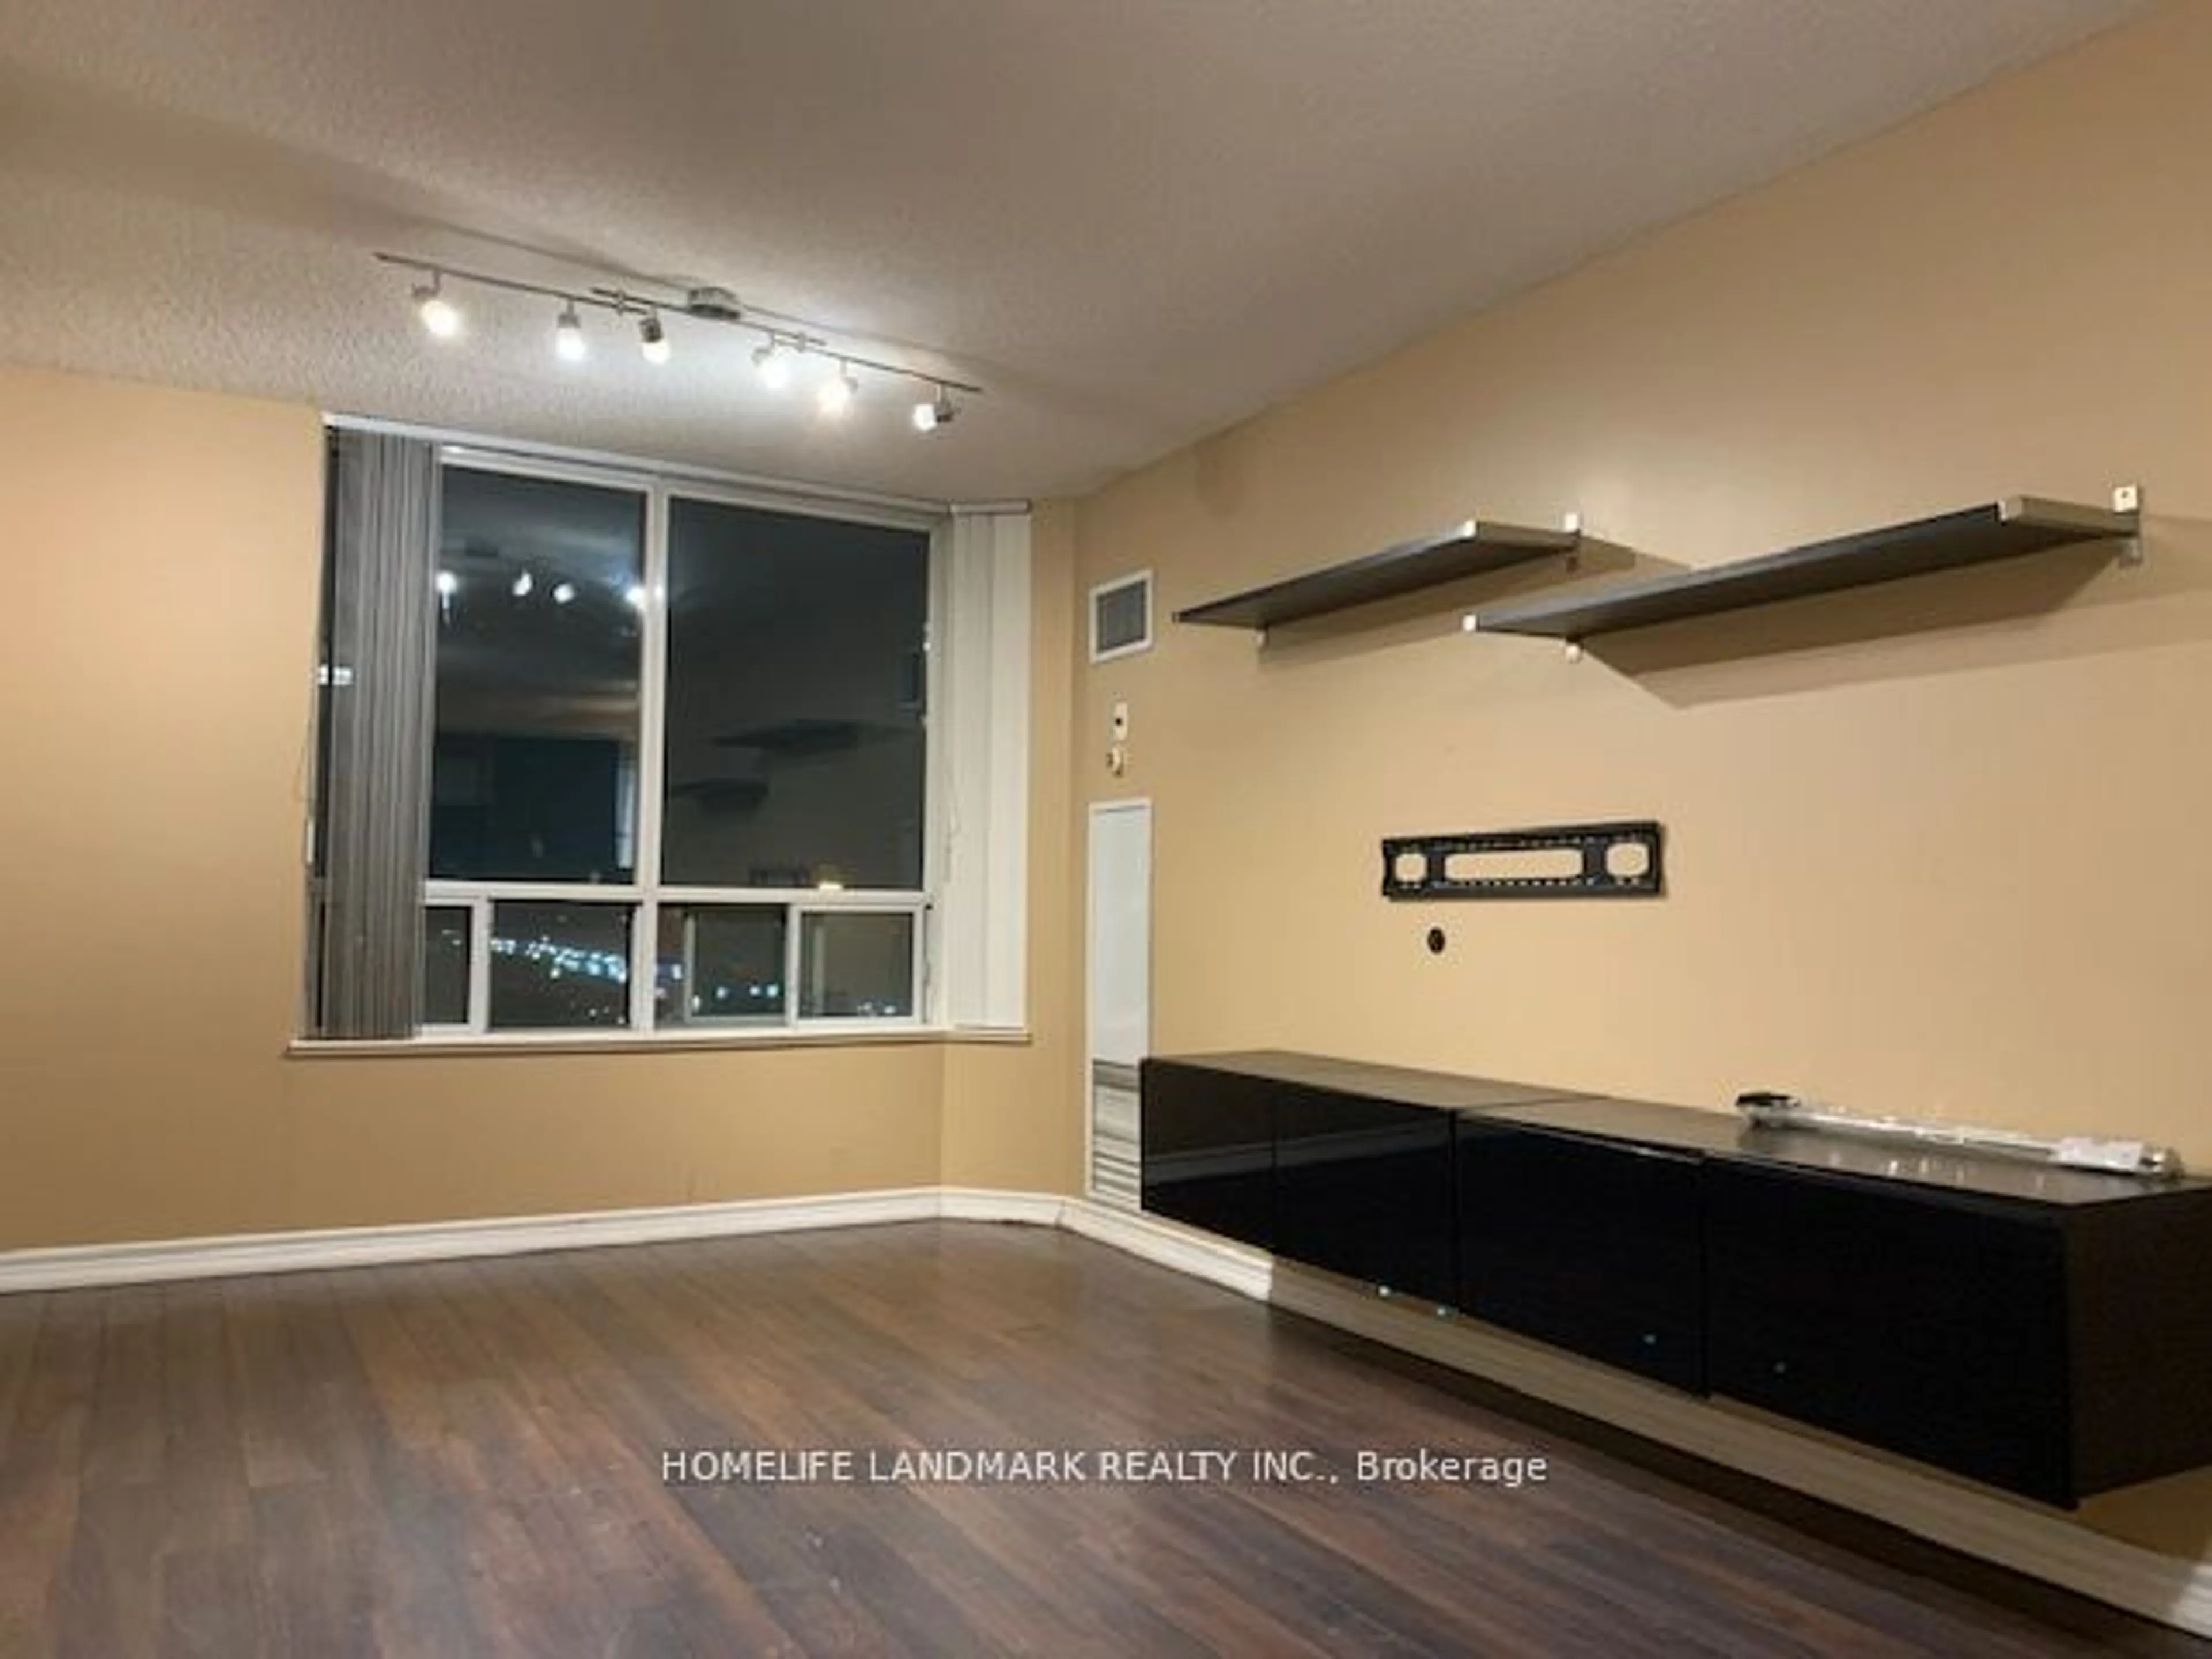 Unknown indoor space for 68 Corporate Dr #1638, Toronto Ontario M1H 3H3